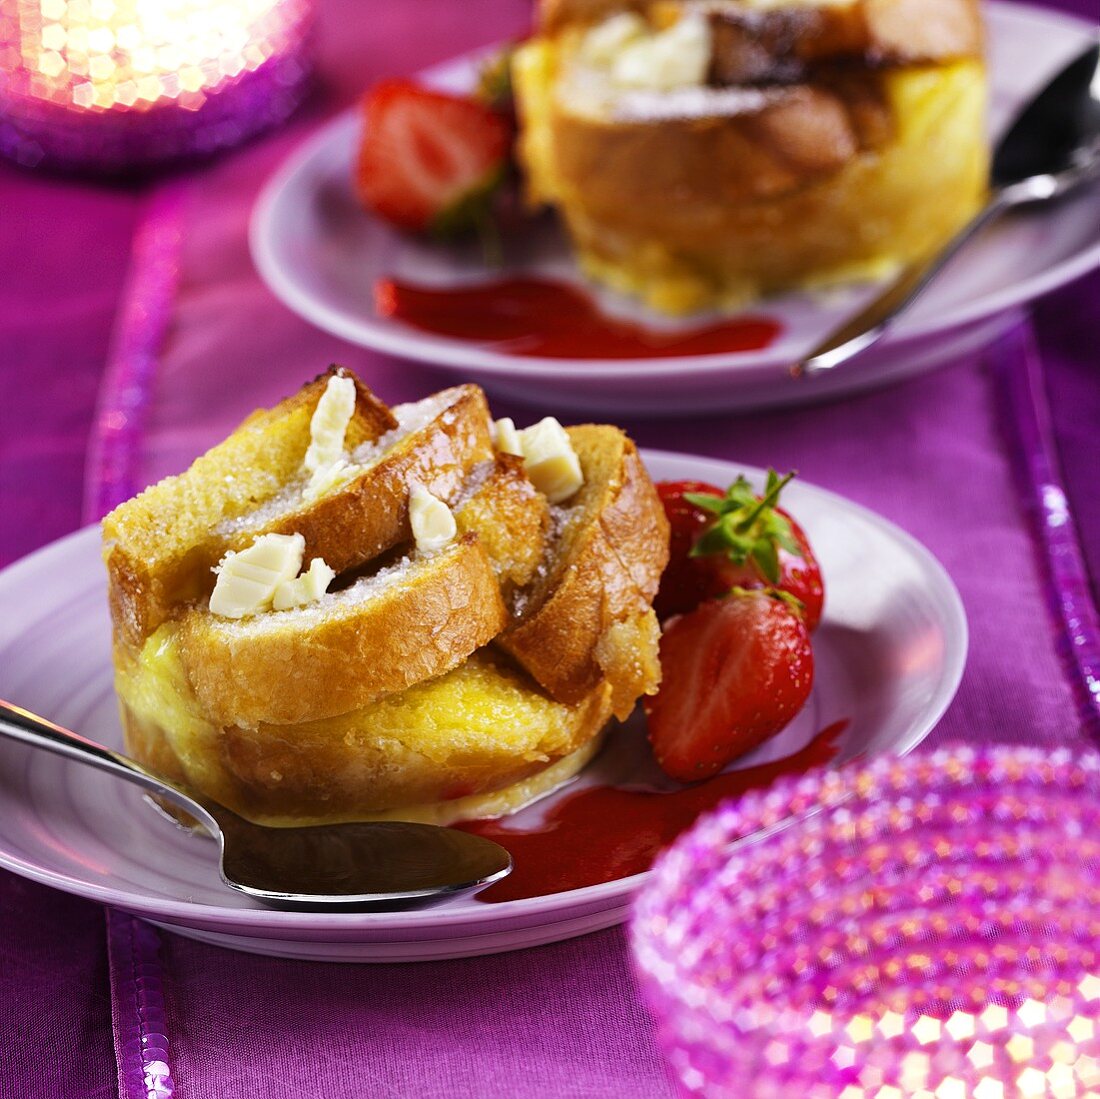 Bread pudding with strawberry sauce